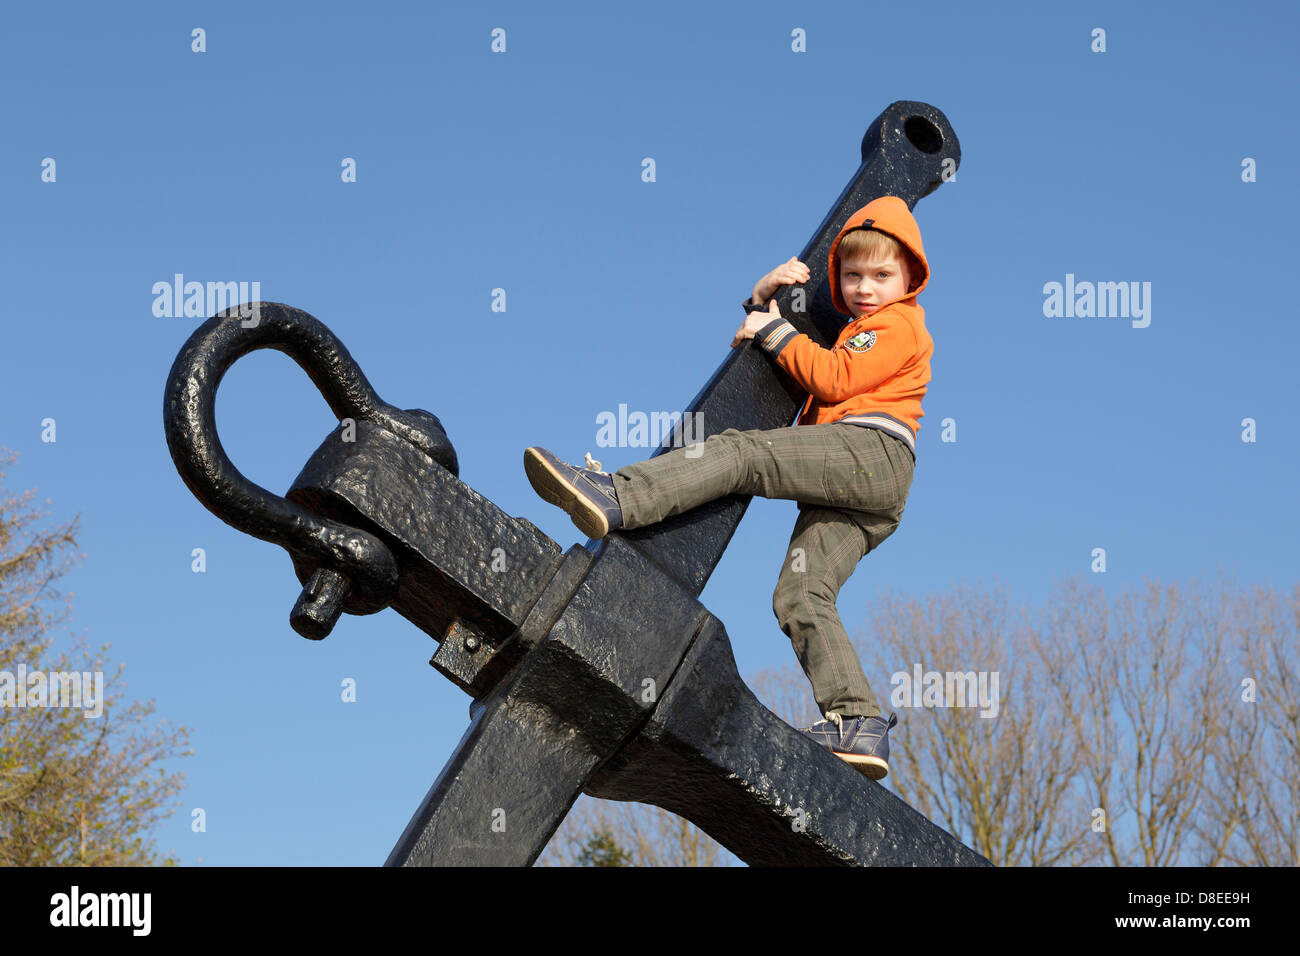 young boy climbing an anchor, Privall, Travemuende, Schleswig-Holstein, Germany Stock Photo